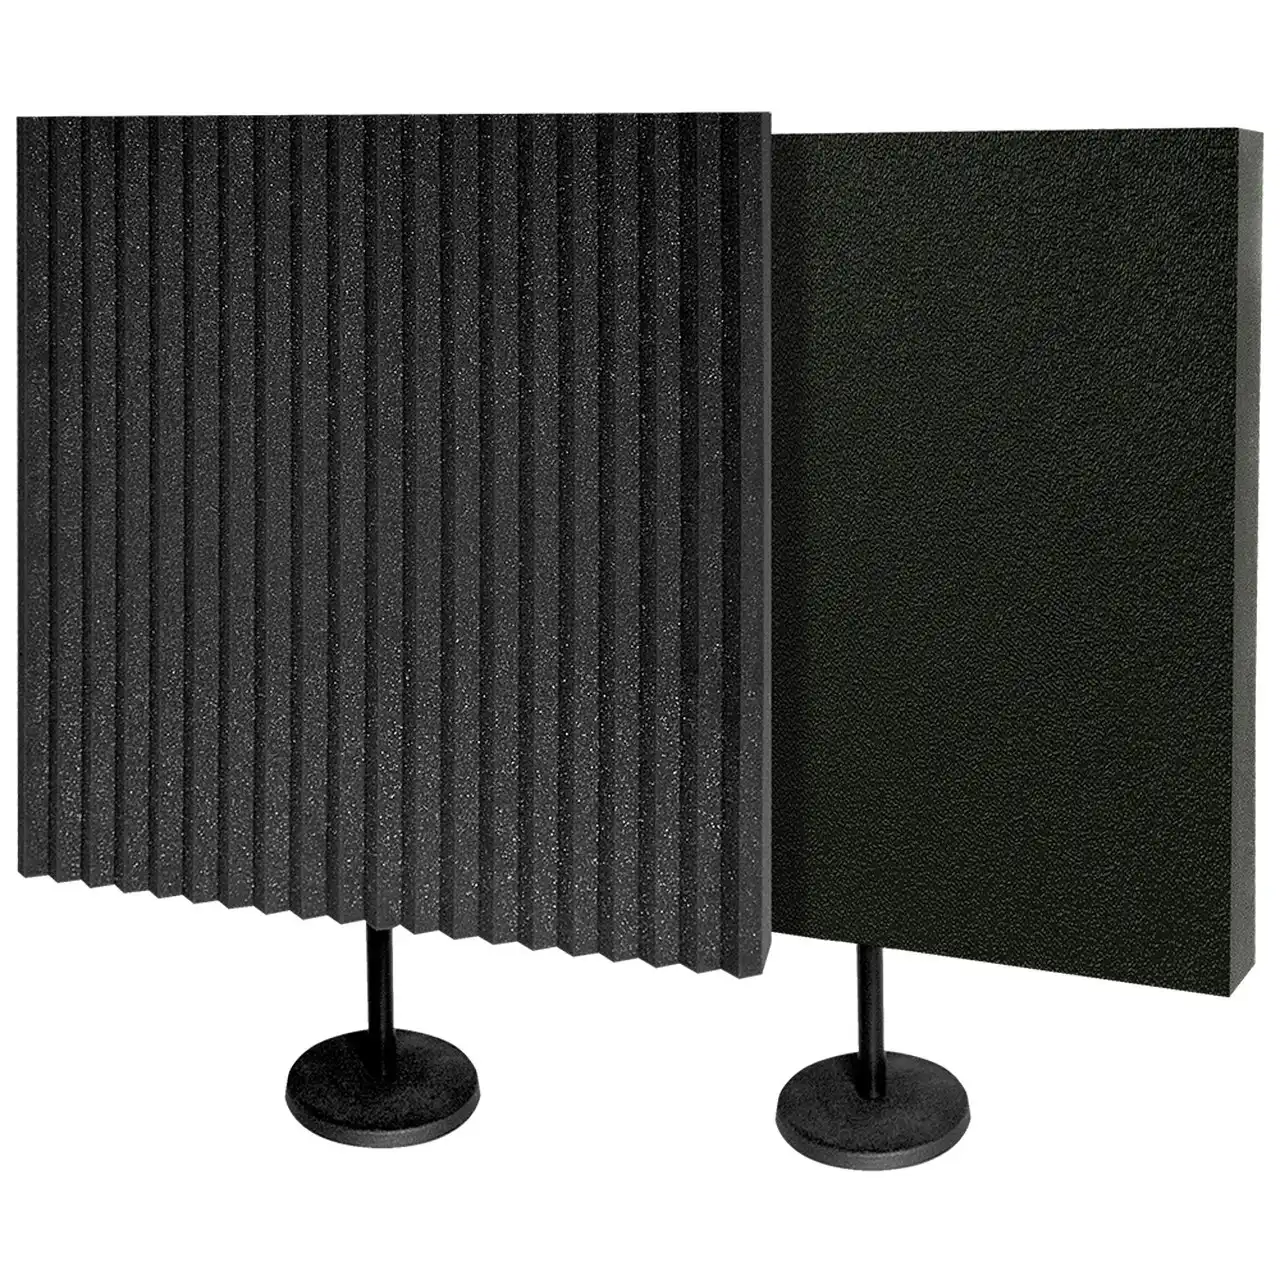 2x Auralex DeskMAX 2ft Portable Podcasting Panel Filter Shield w/ Stand Charcoal